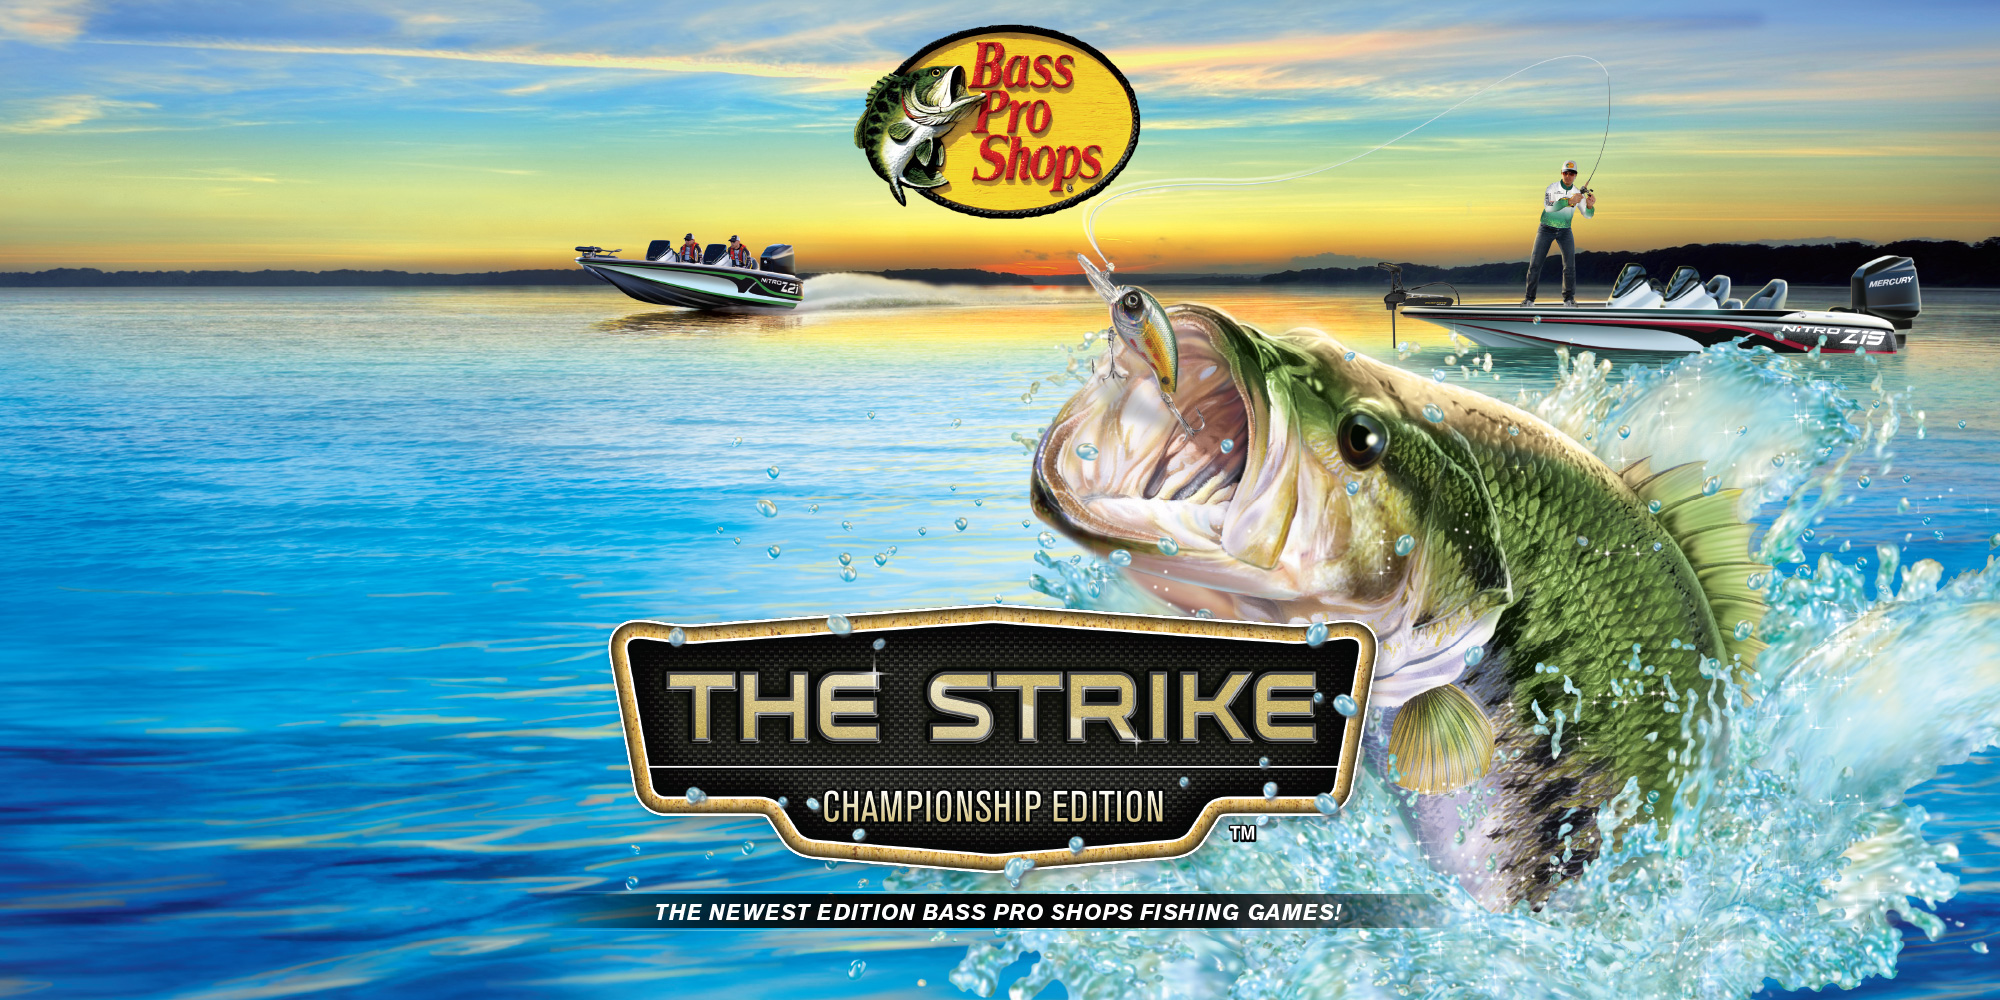 Bass Pro Shops: The Strike - Championship Edition, Nintendo Switch games, Games